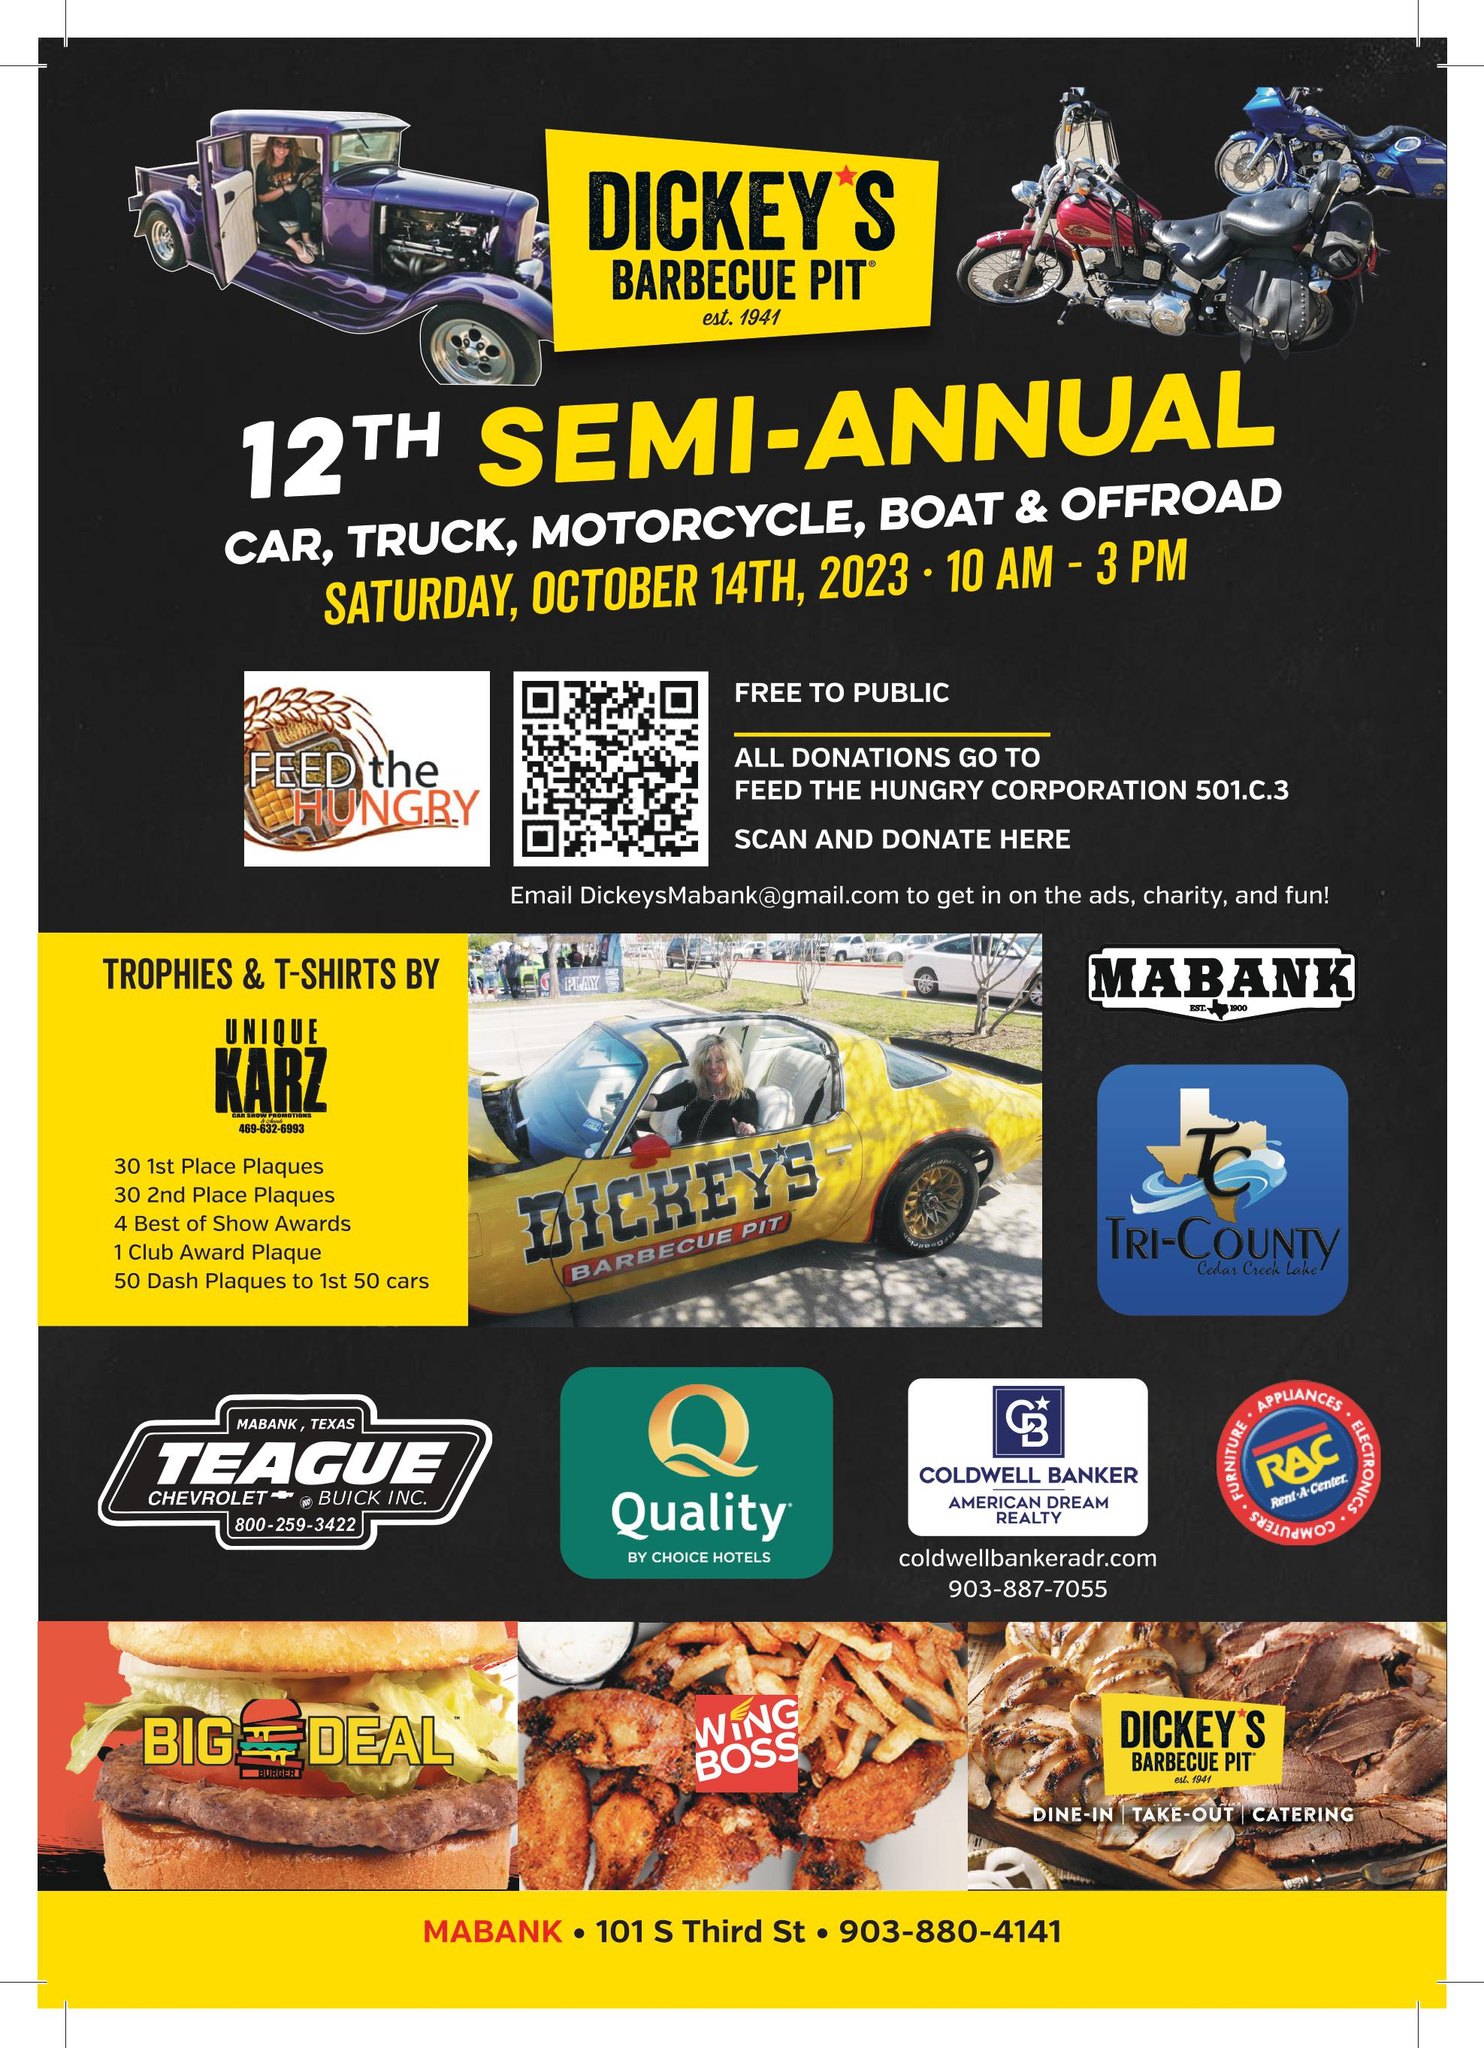 12th Semi-Annual Car Show in Mabank, Texas, presented by Dickey's Barbecue Pit! 1 dickeys car show CedarCreekLake.Online